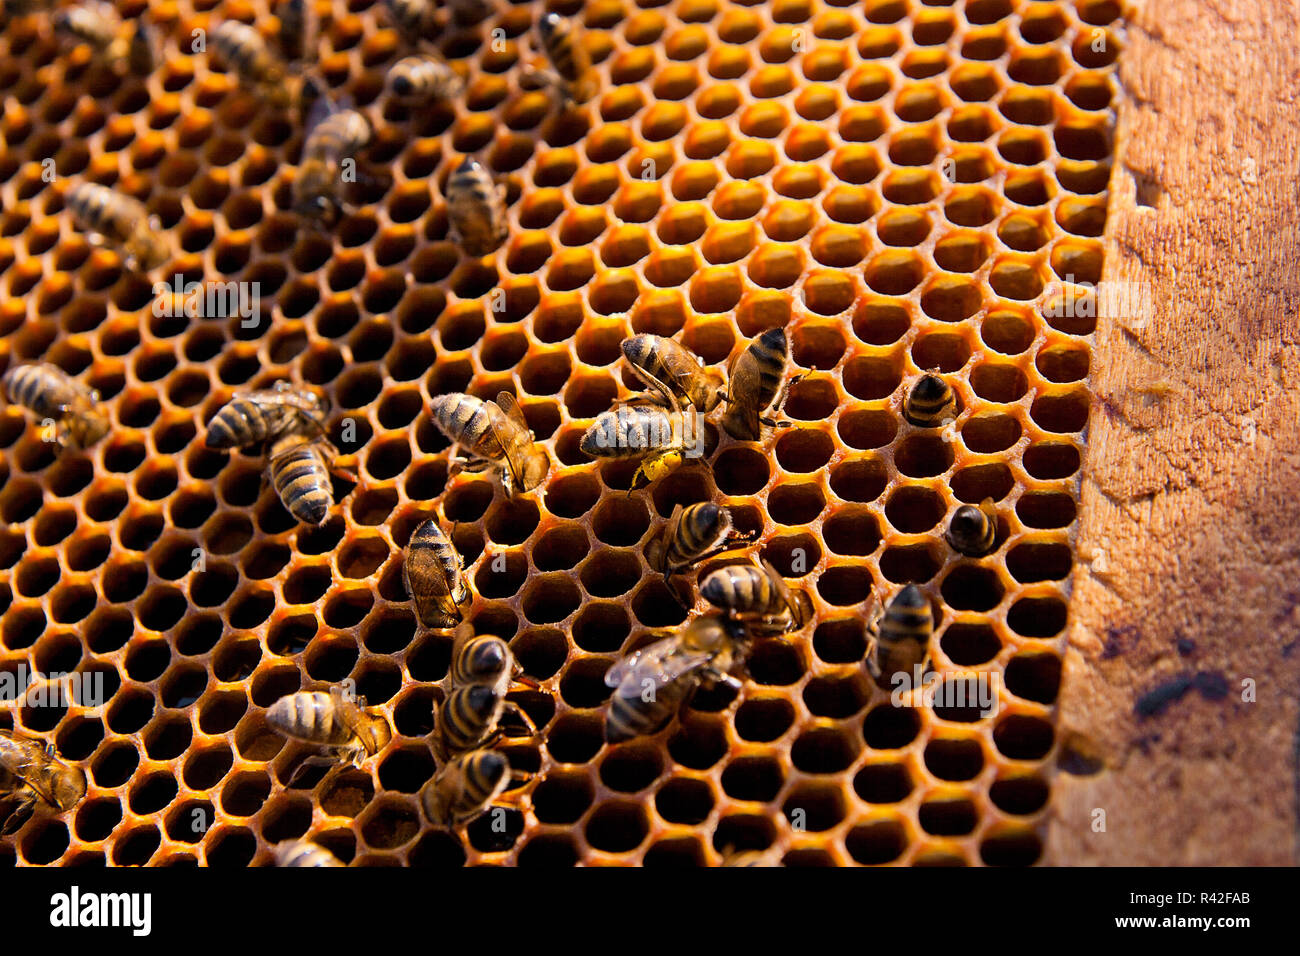 Busy bees, close up view of the working bees on honeycomb. Stock Photo